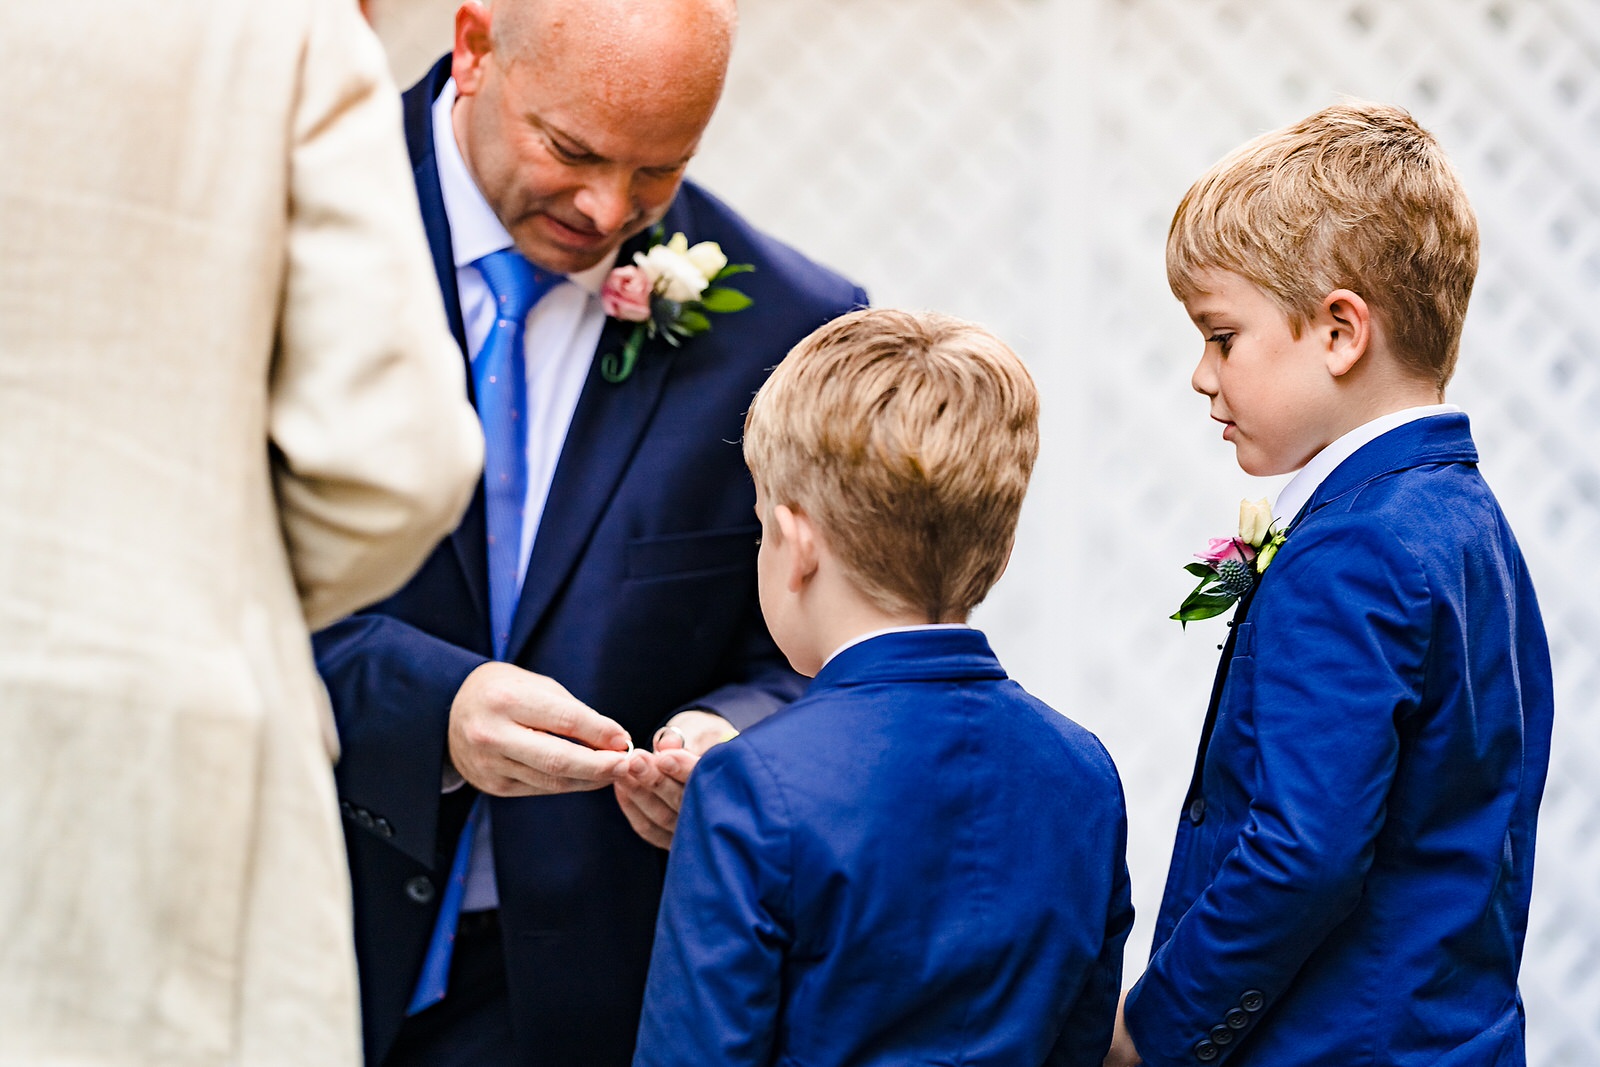 Groom shows his sons the wedding rings